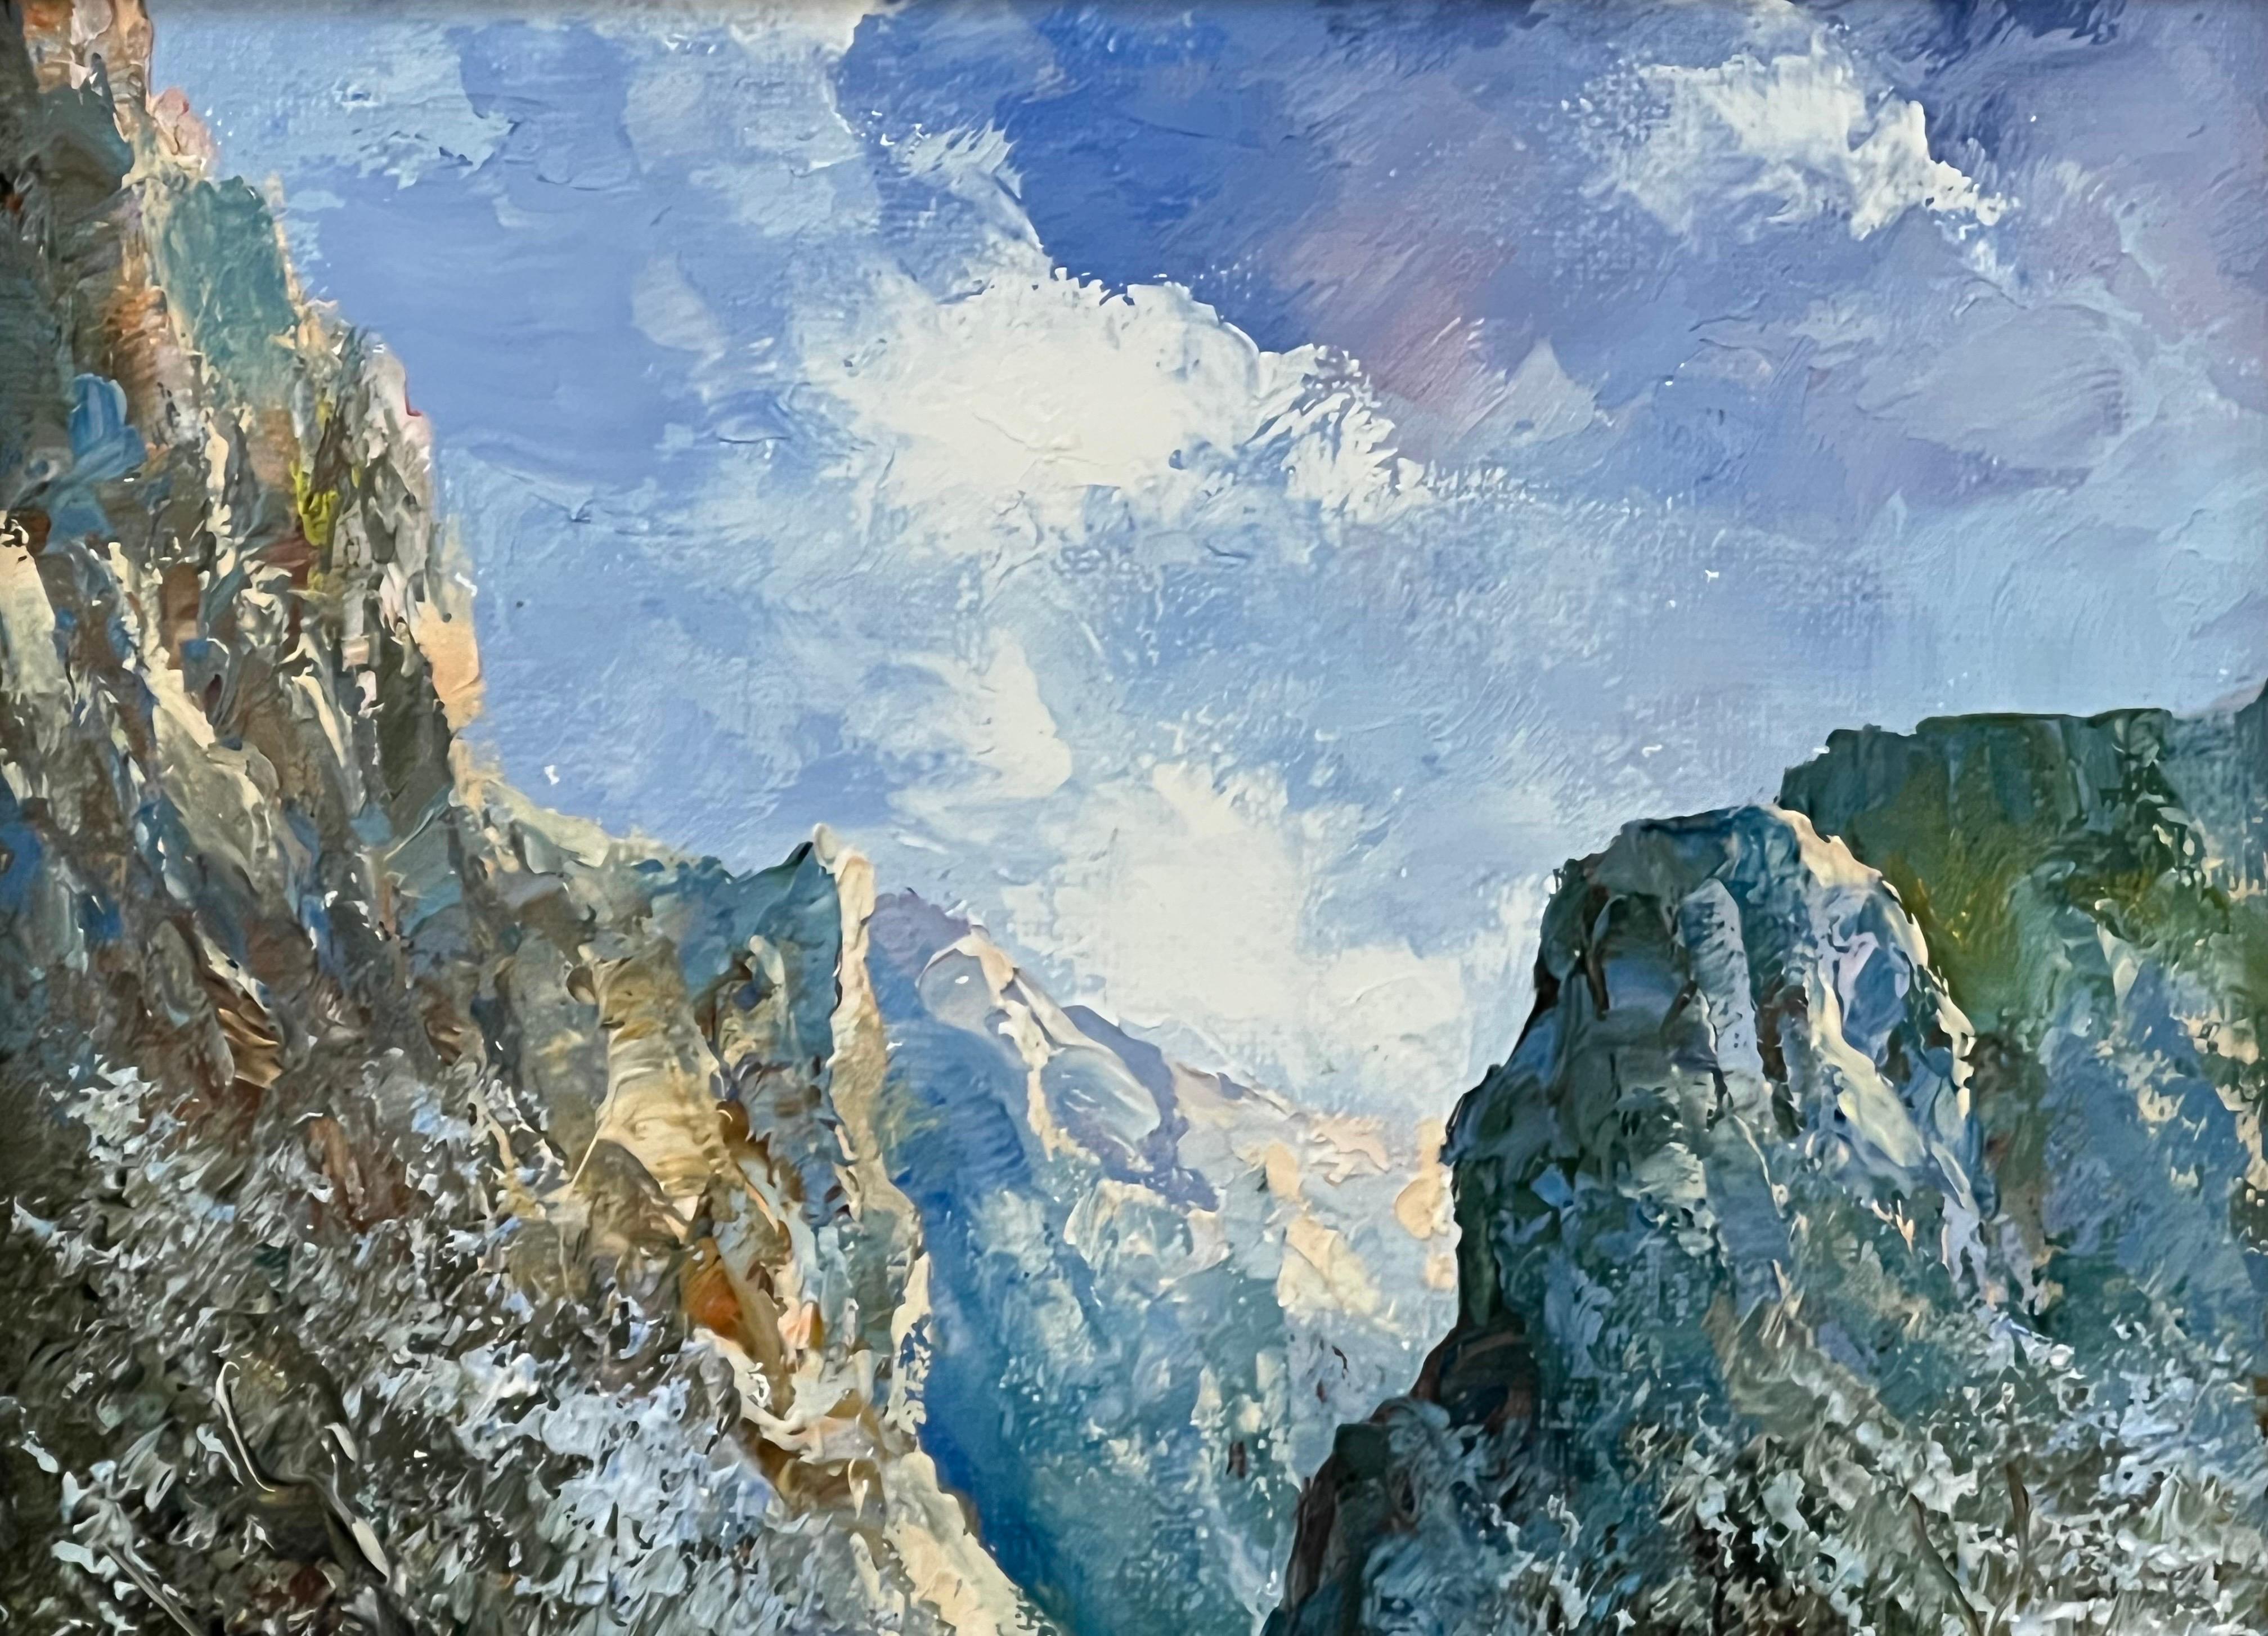 Mountains in Spain, Colourful Original Oil by 20th Century Spanish School Artist, G Munar 

Art measures 11 x 9 inches 
Frame measures 17 x 15 inches 

Presented in a period ornate frame 
